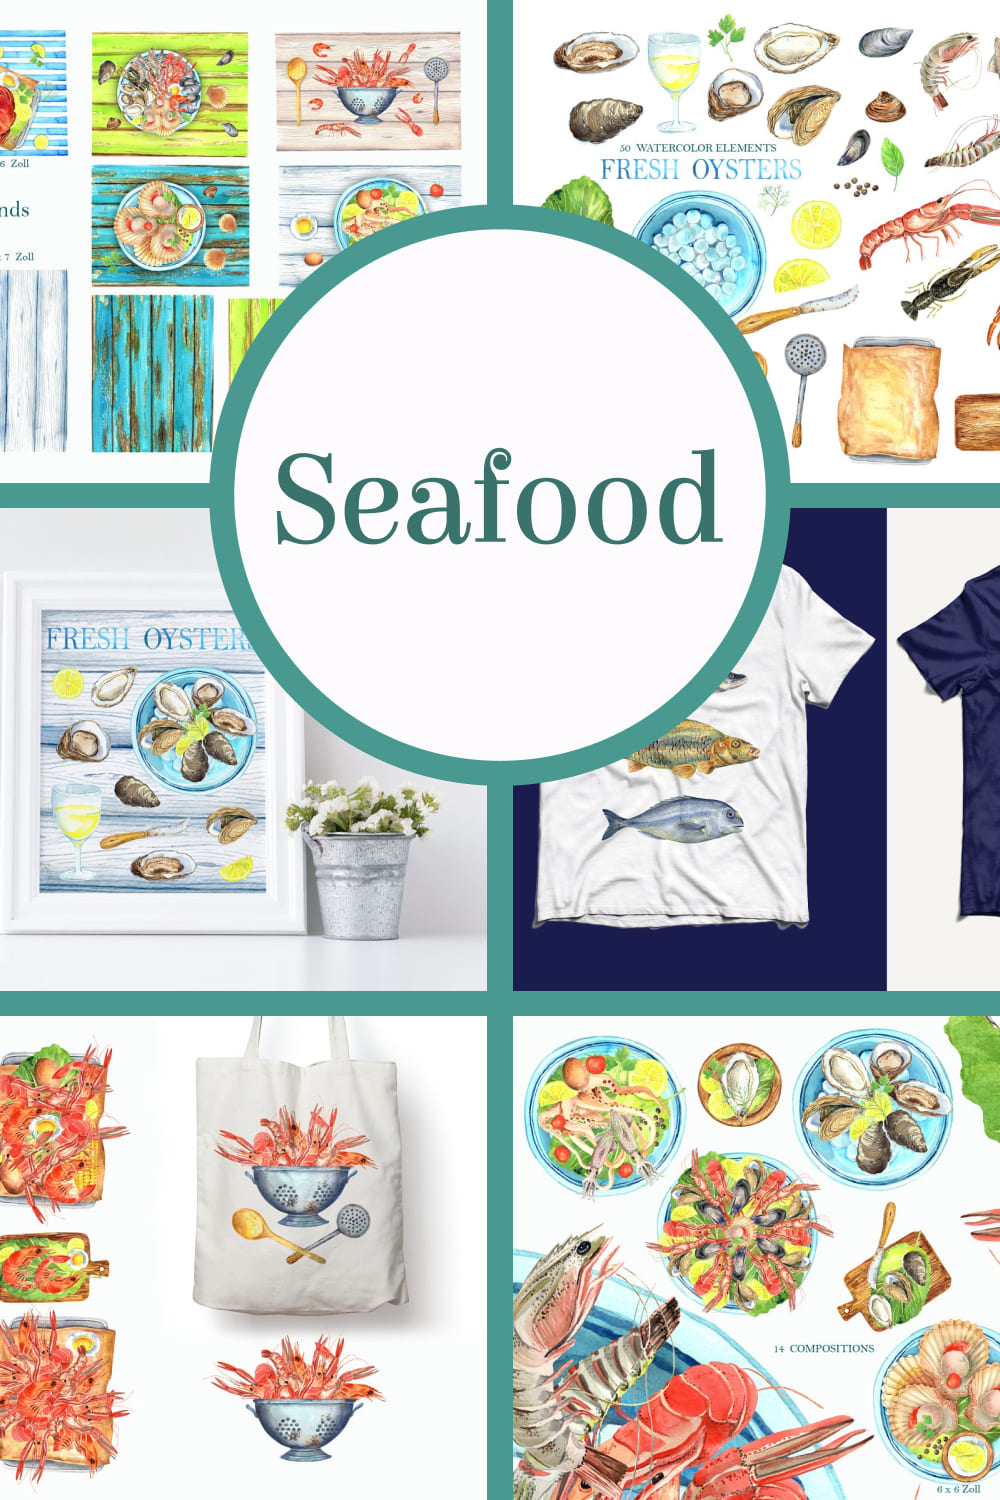 Seafood - pinterest image preview.